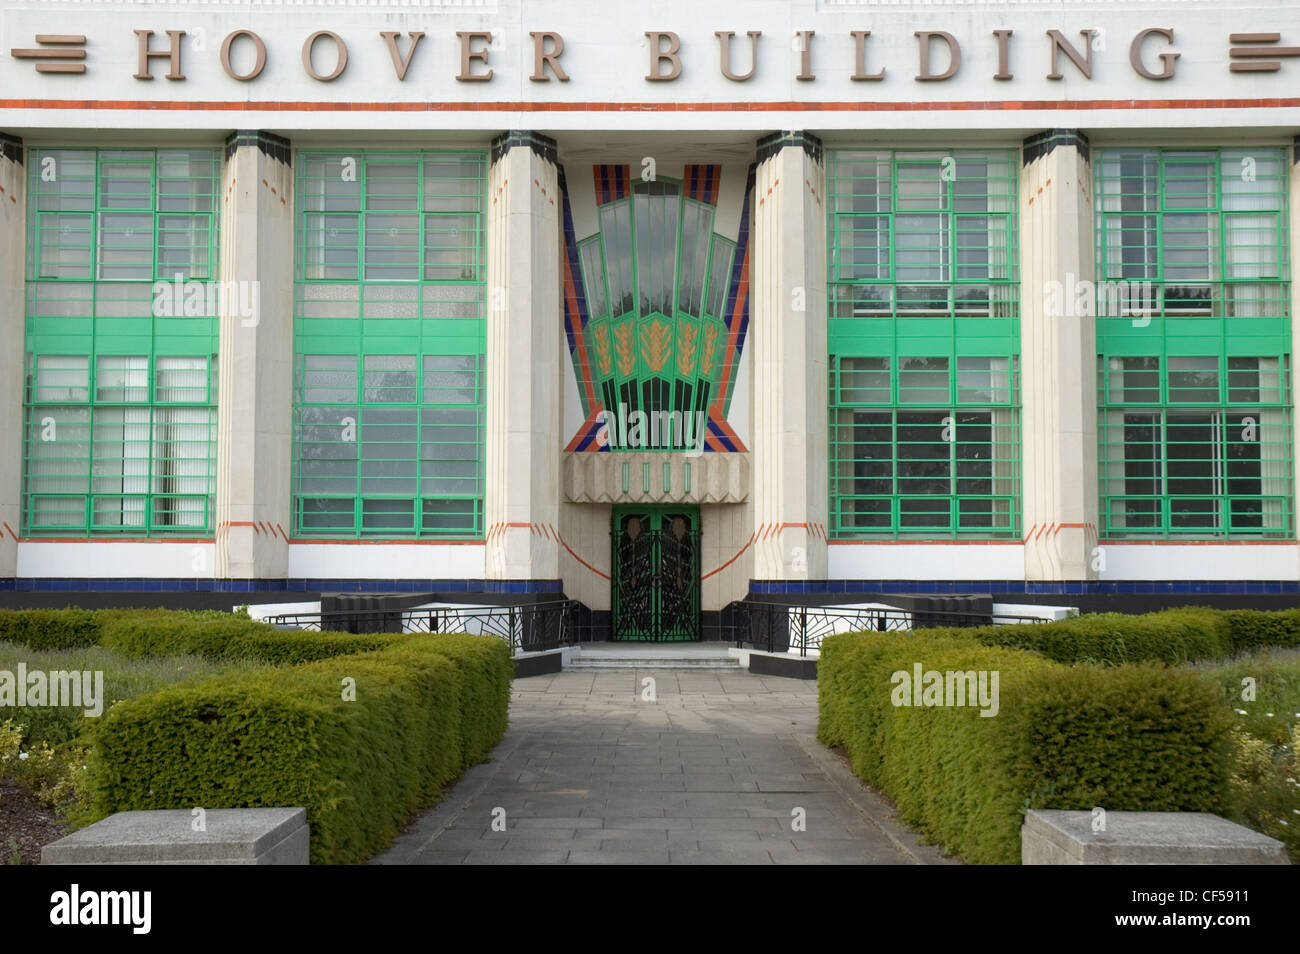 The front of the Hoover building which is a former factory currently being used as a Tesco supermarket. Stock Photo